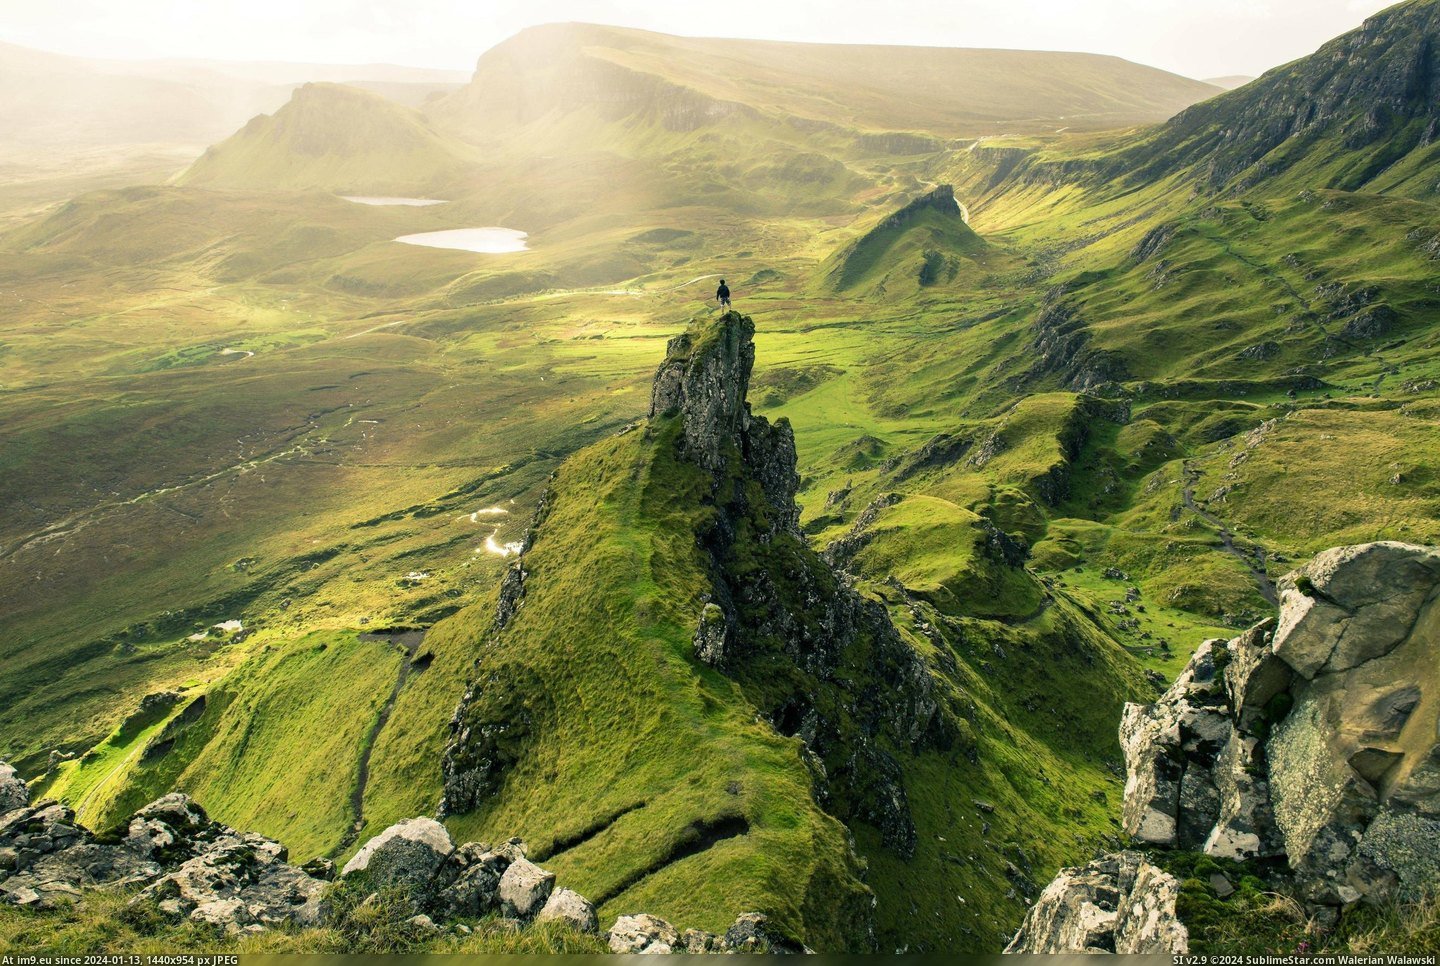 #Was #Area #Isle #Suggested #Quiraing #Skye #Scenery [Earthporn] I was suggested to post this here. This is the Quiraing area of the Isle of Skye, with me taking in the scenery. [26 Pic. (Bild von album My r/EARTHPORN favs))